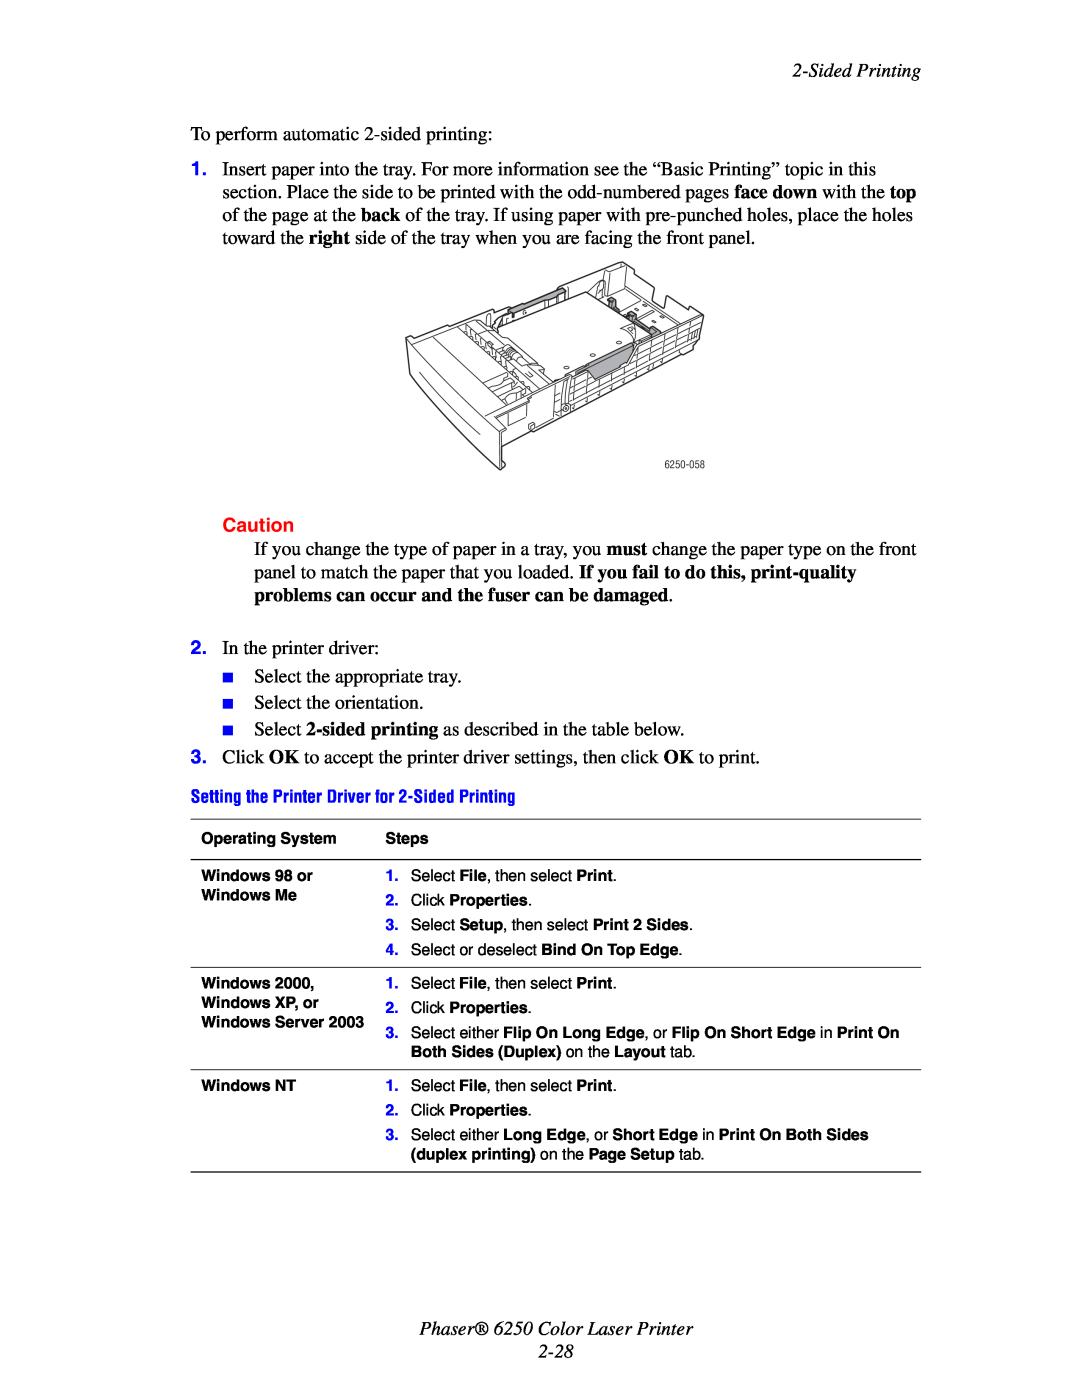 Xerox manual Phaser 6250 Color Laser Printer 2-28, Setting the Printer Driver for 2-Sided Printing 